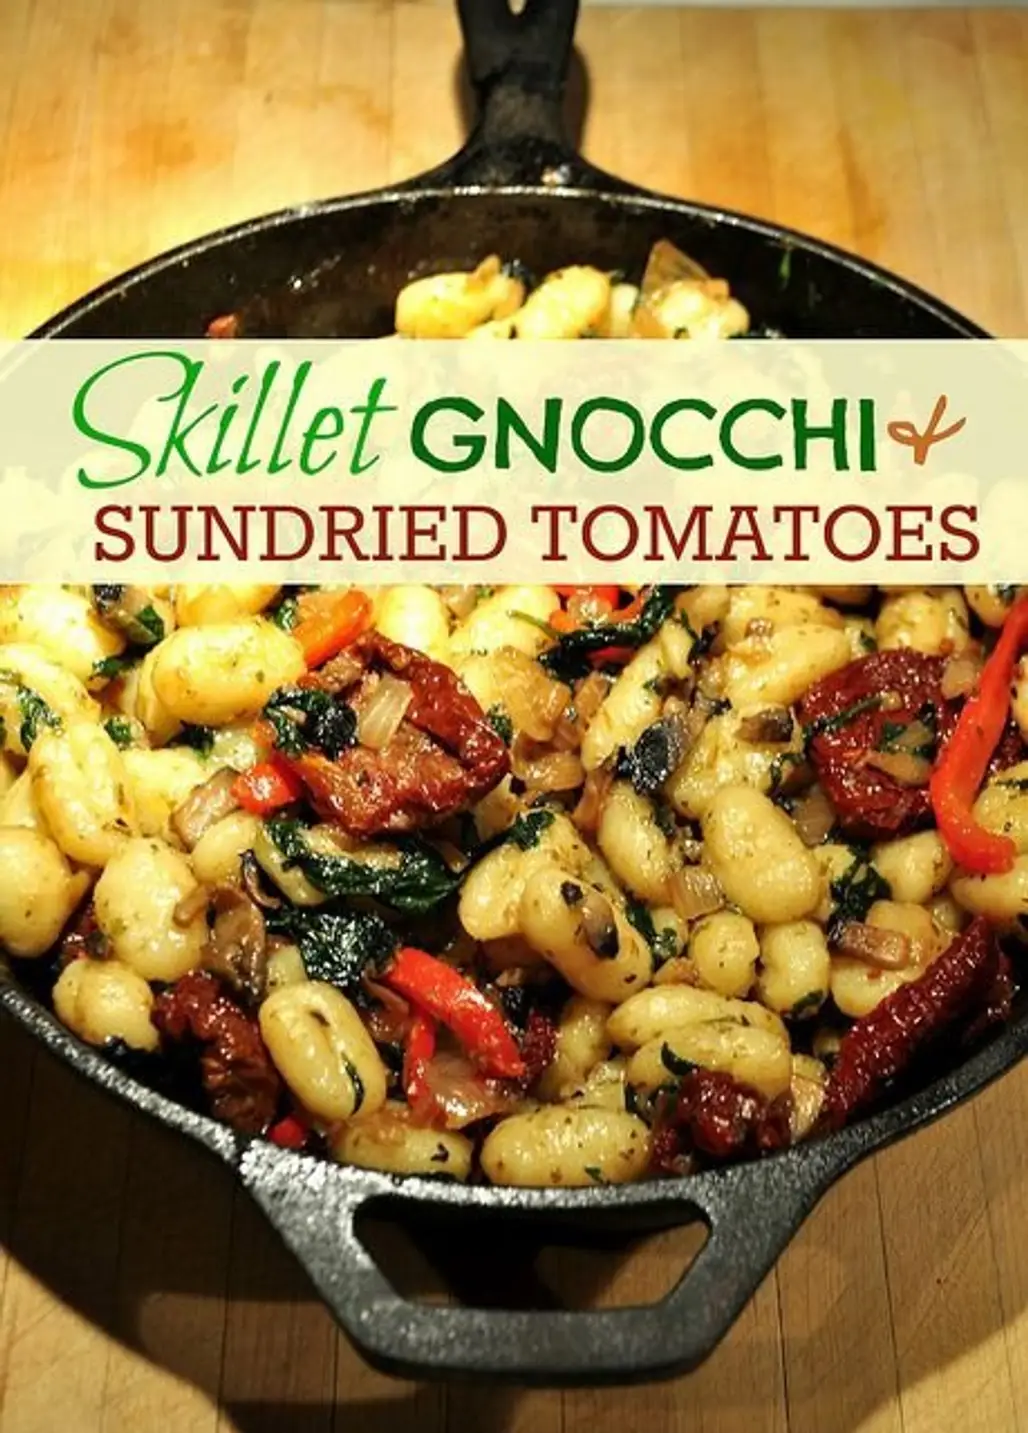 Skillet Gnocchi with Sundried Tomatoes, Spinach, Onion, Bell Pepper and Mushrooms